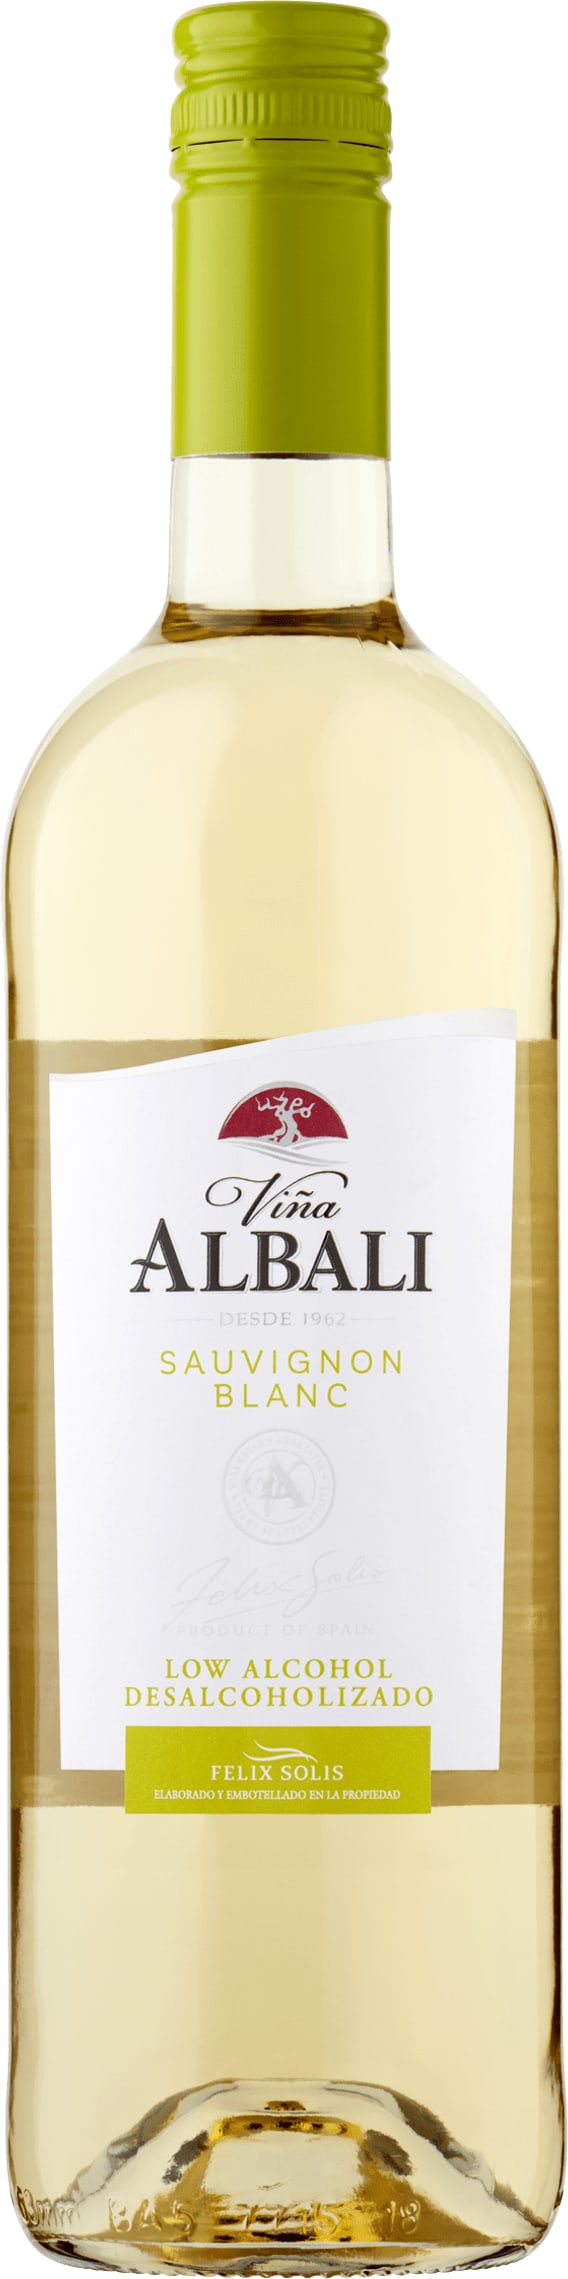 Albali Sauvignon Blanc Low Alcohol 2022 75cl - Buy Albali Wines from GREAT WINES DIRECT wine shop